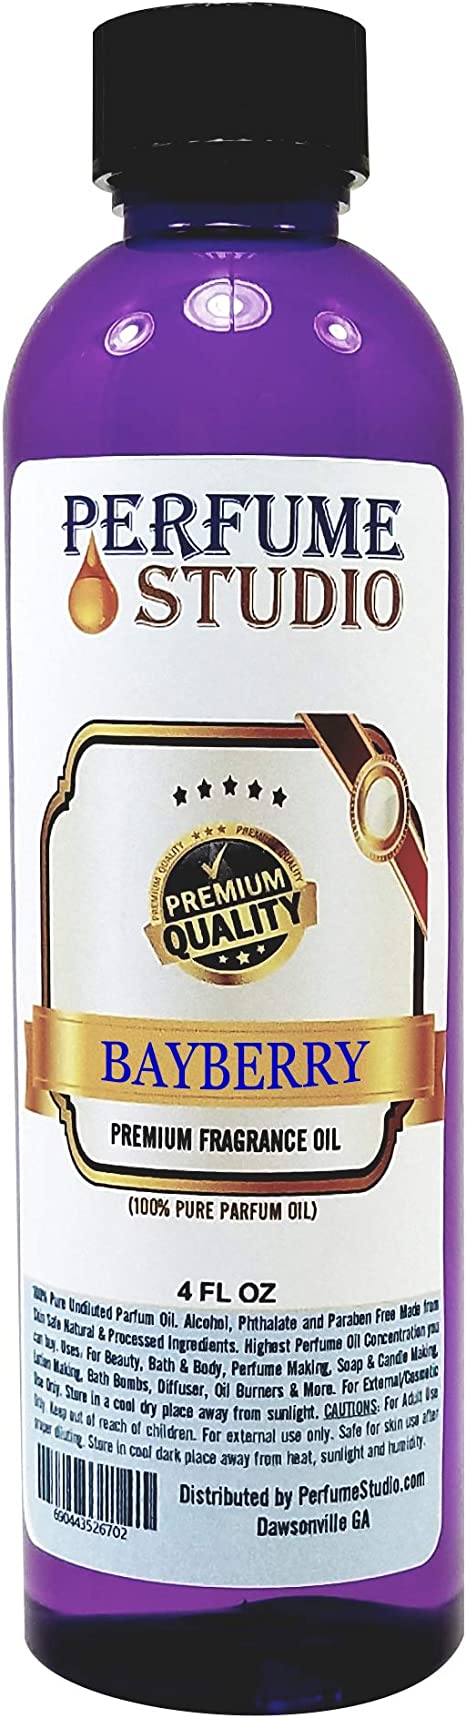 Bayberry Fragrance Oil for Making Candle, Soap, Lotion, Perfume, Cologne, Incense, Bath Bomb, Diffusers, Plug in Refills, Oil Burners. Premium Quality Undiluted Pure Perfume Oil (Bayberry 4oz)